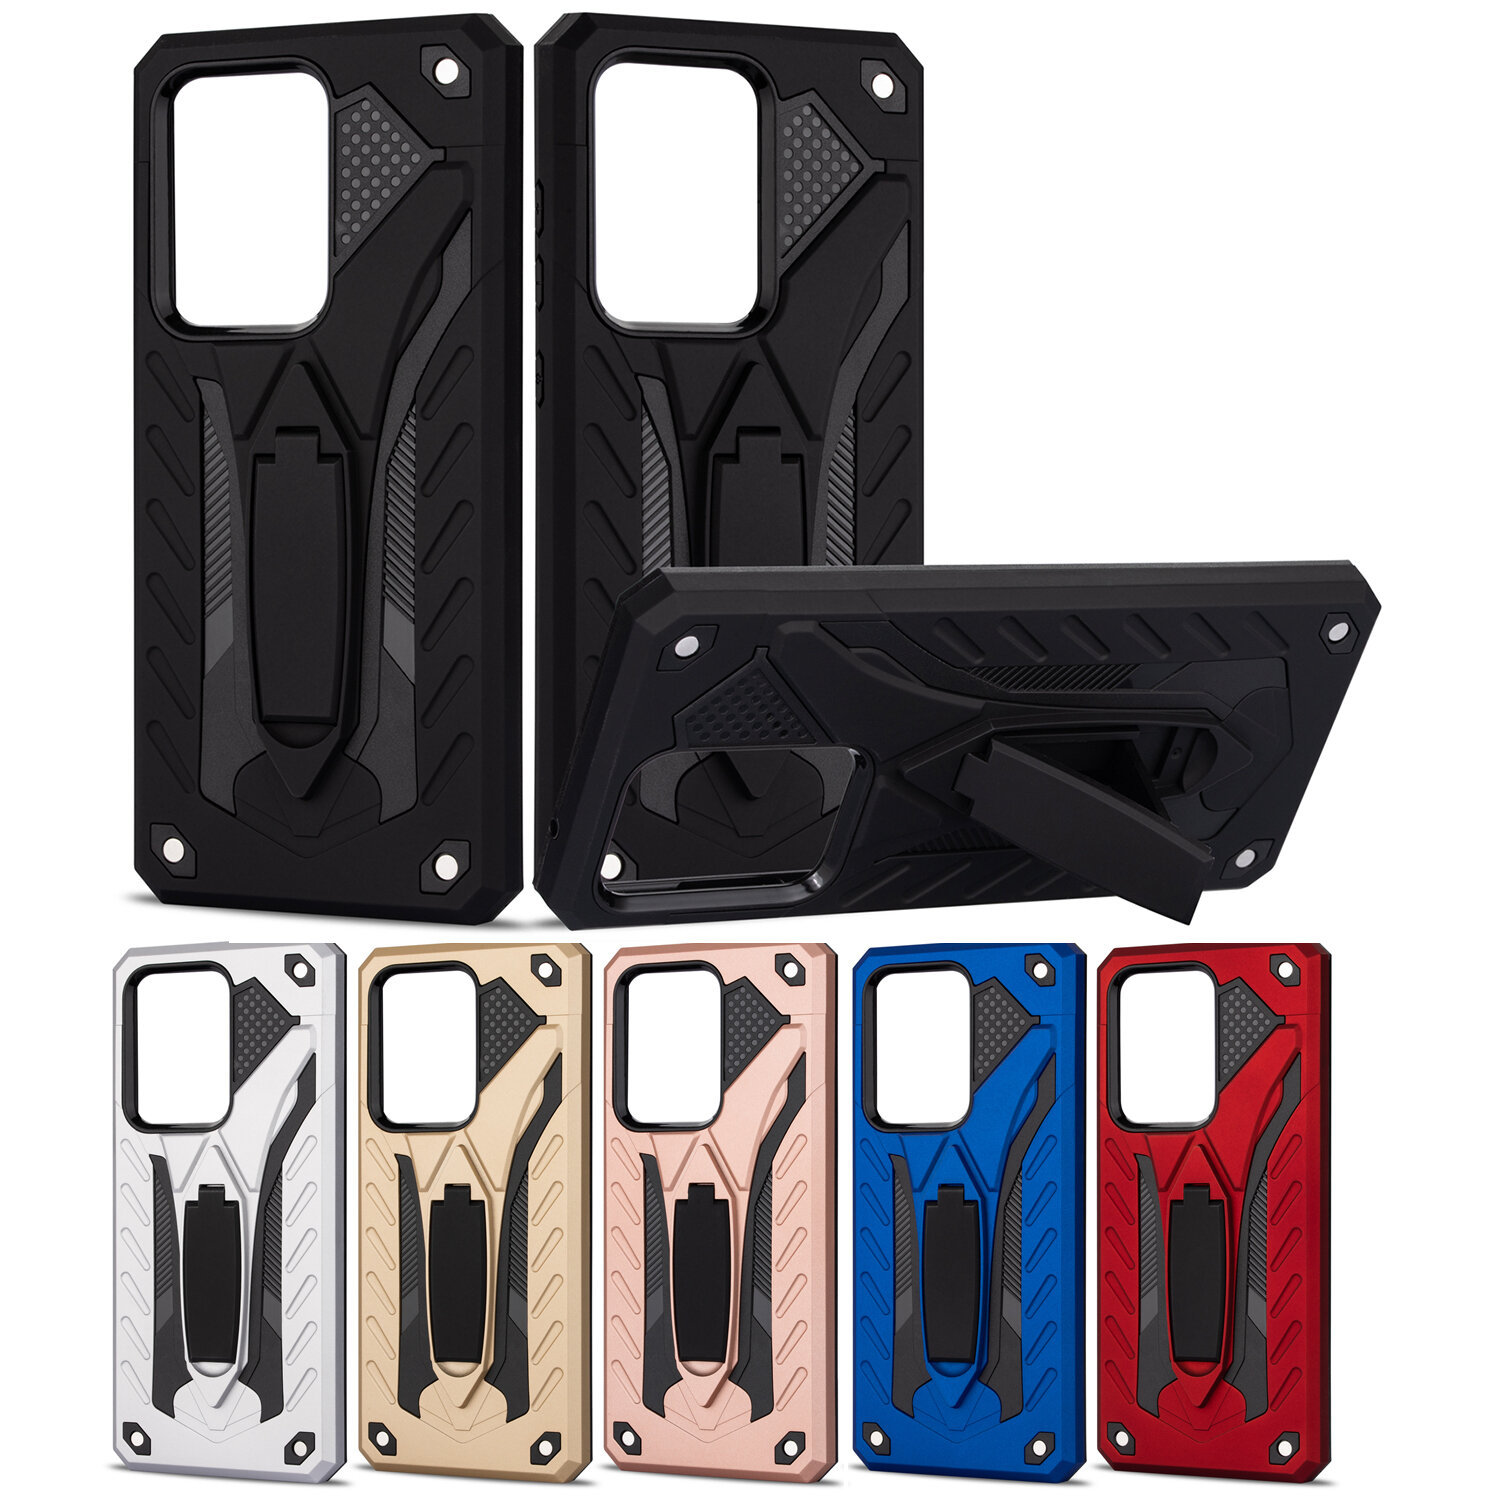 Bakeey Armor Shockproof Anti-Fingerprint with Ring Bracket Stand PC + TPU Protective Case for Samsun